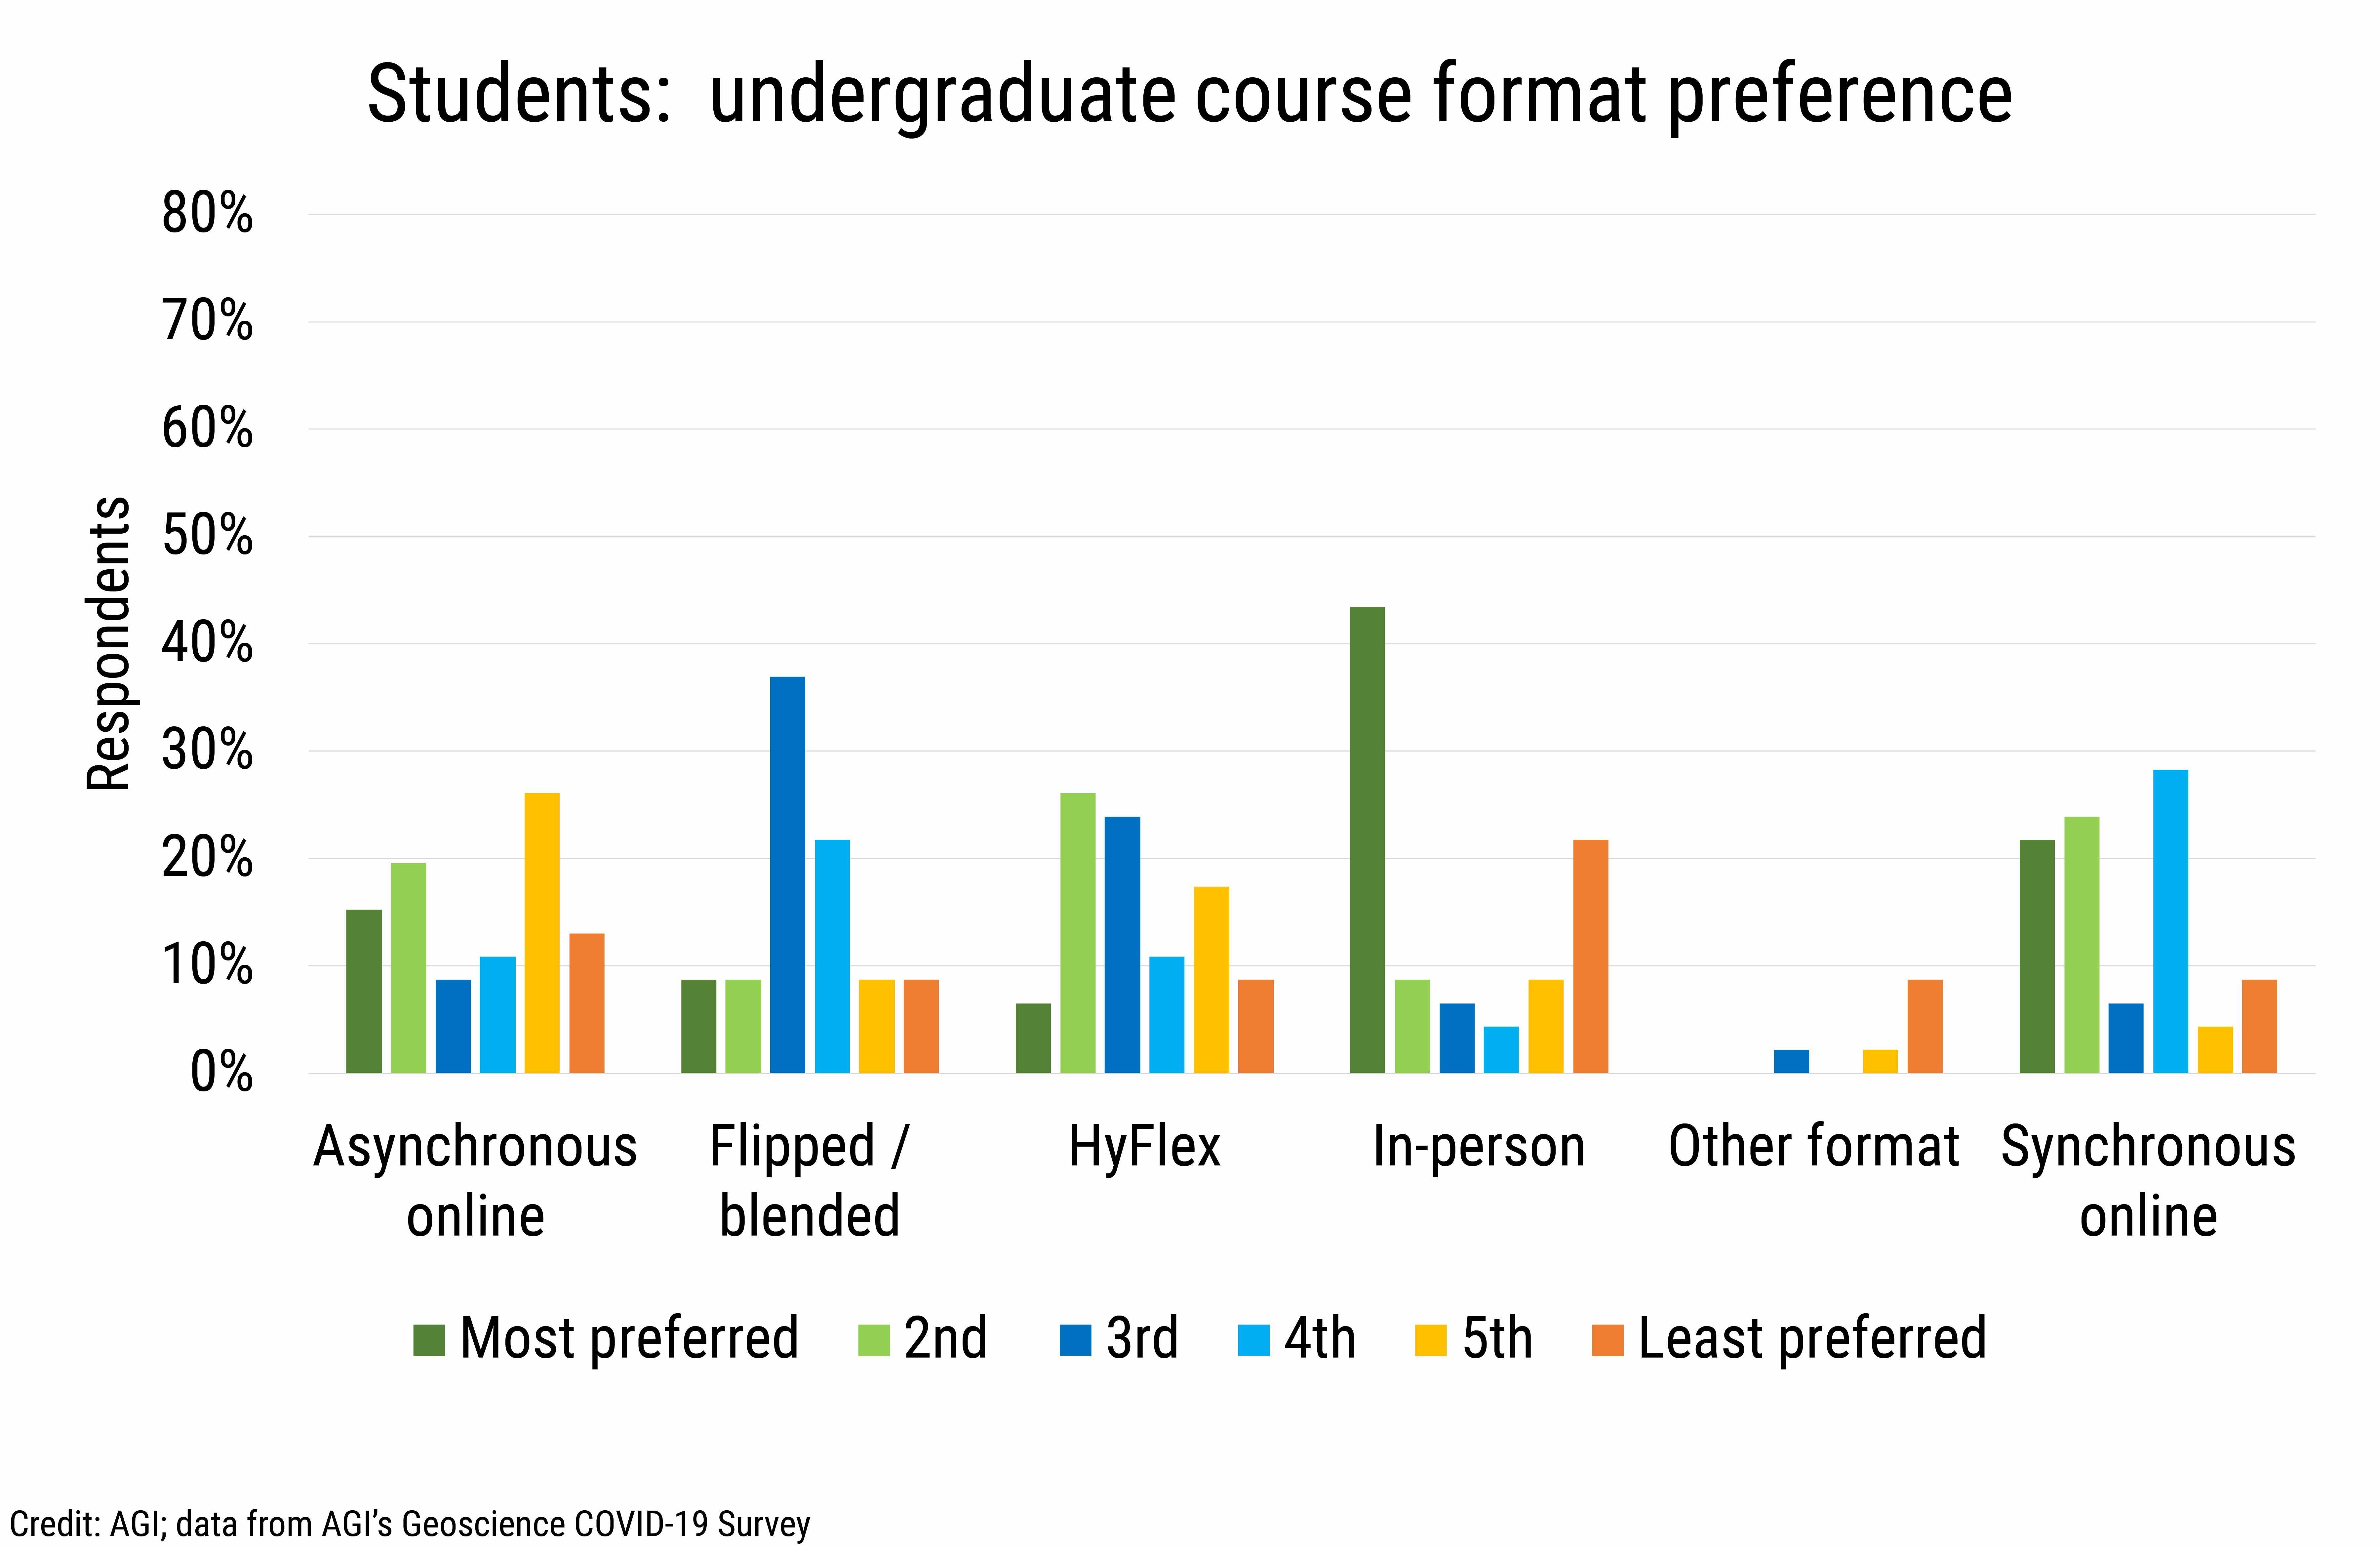 DB_2020-031 chart06 Students undergraduate course format preference (Credit: AGI; data from AGI's Geoscience COVID-19 Survey)